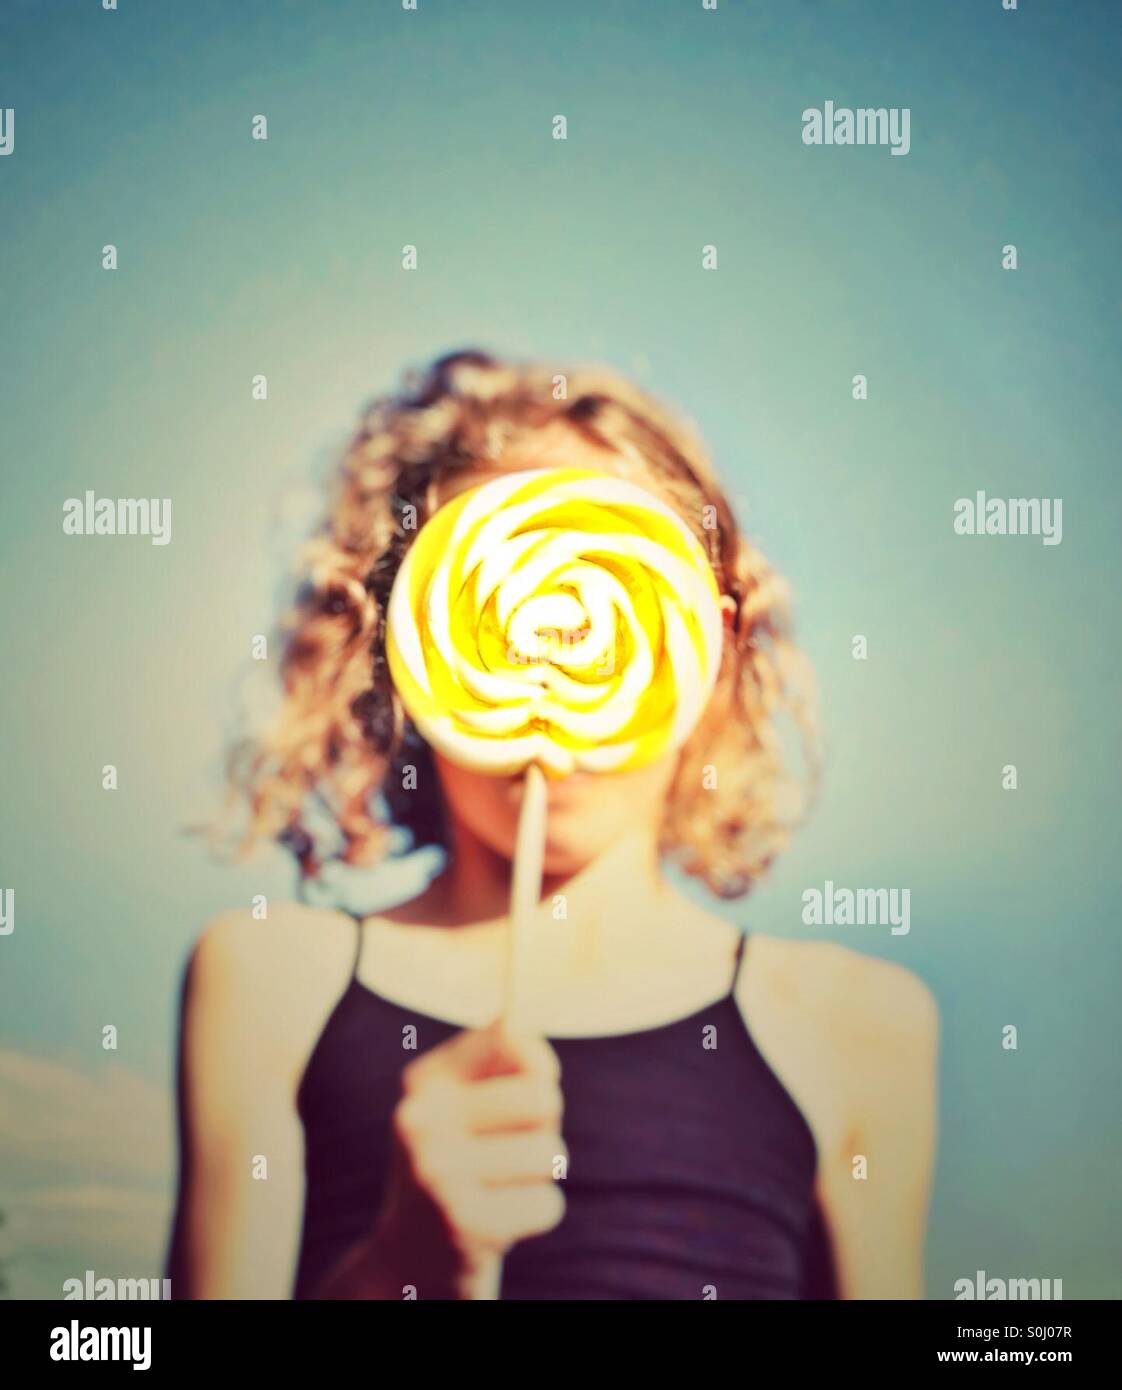 Young girl holding candy lolly in front of her face Stock Photo